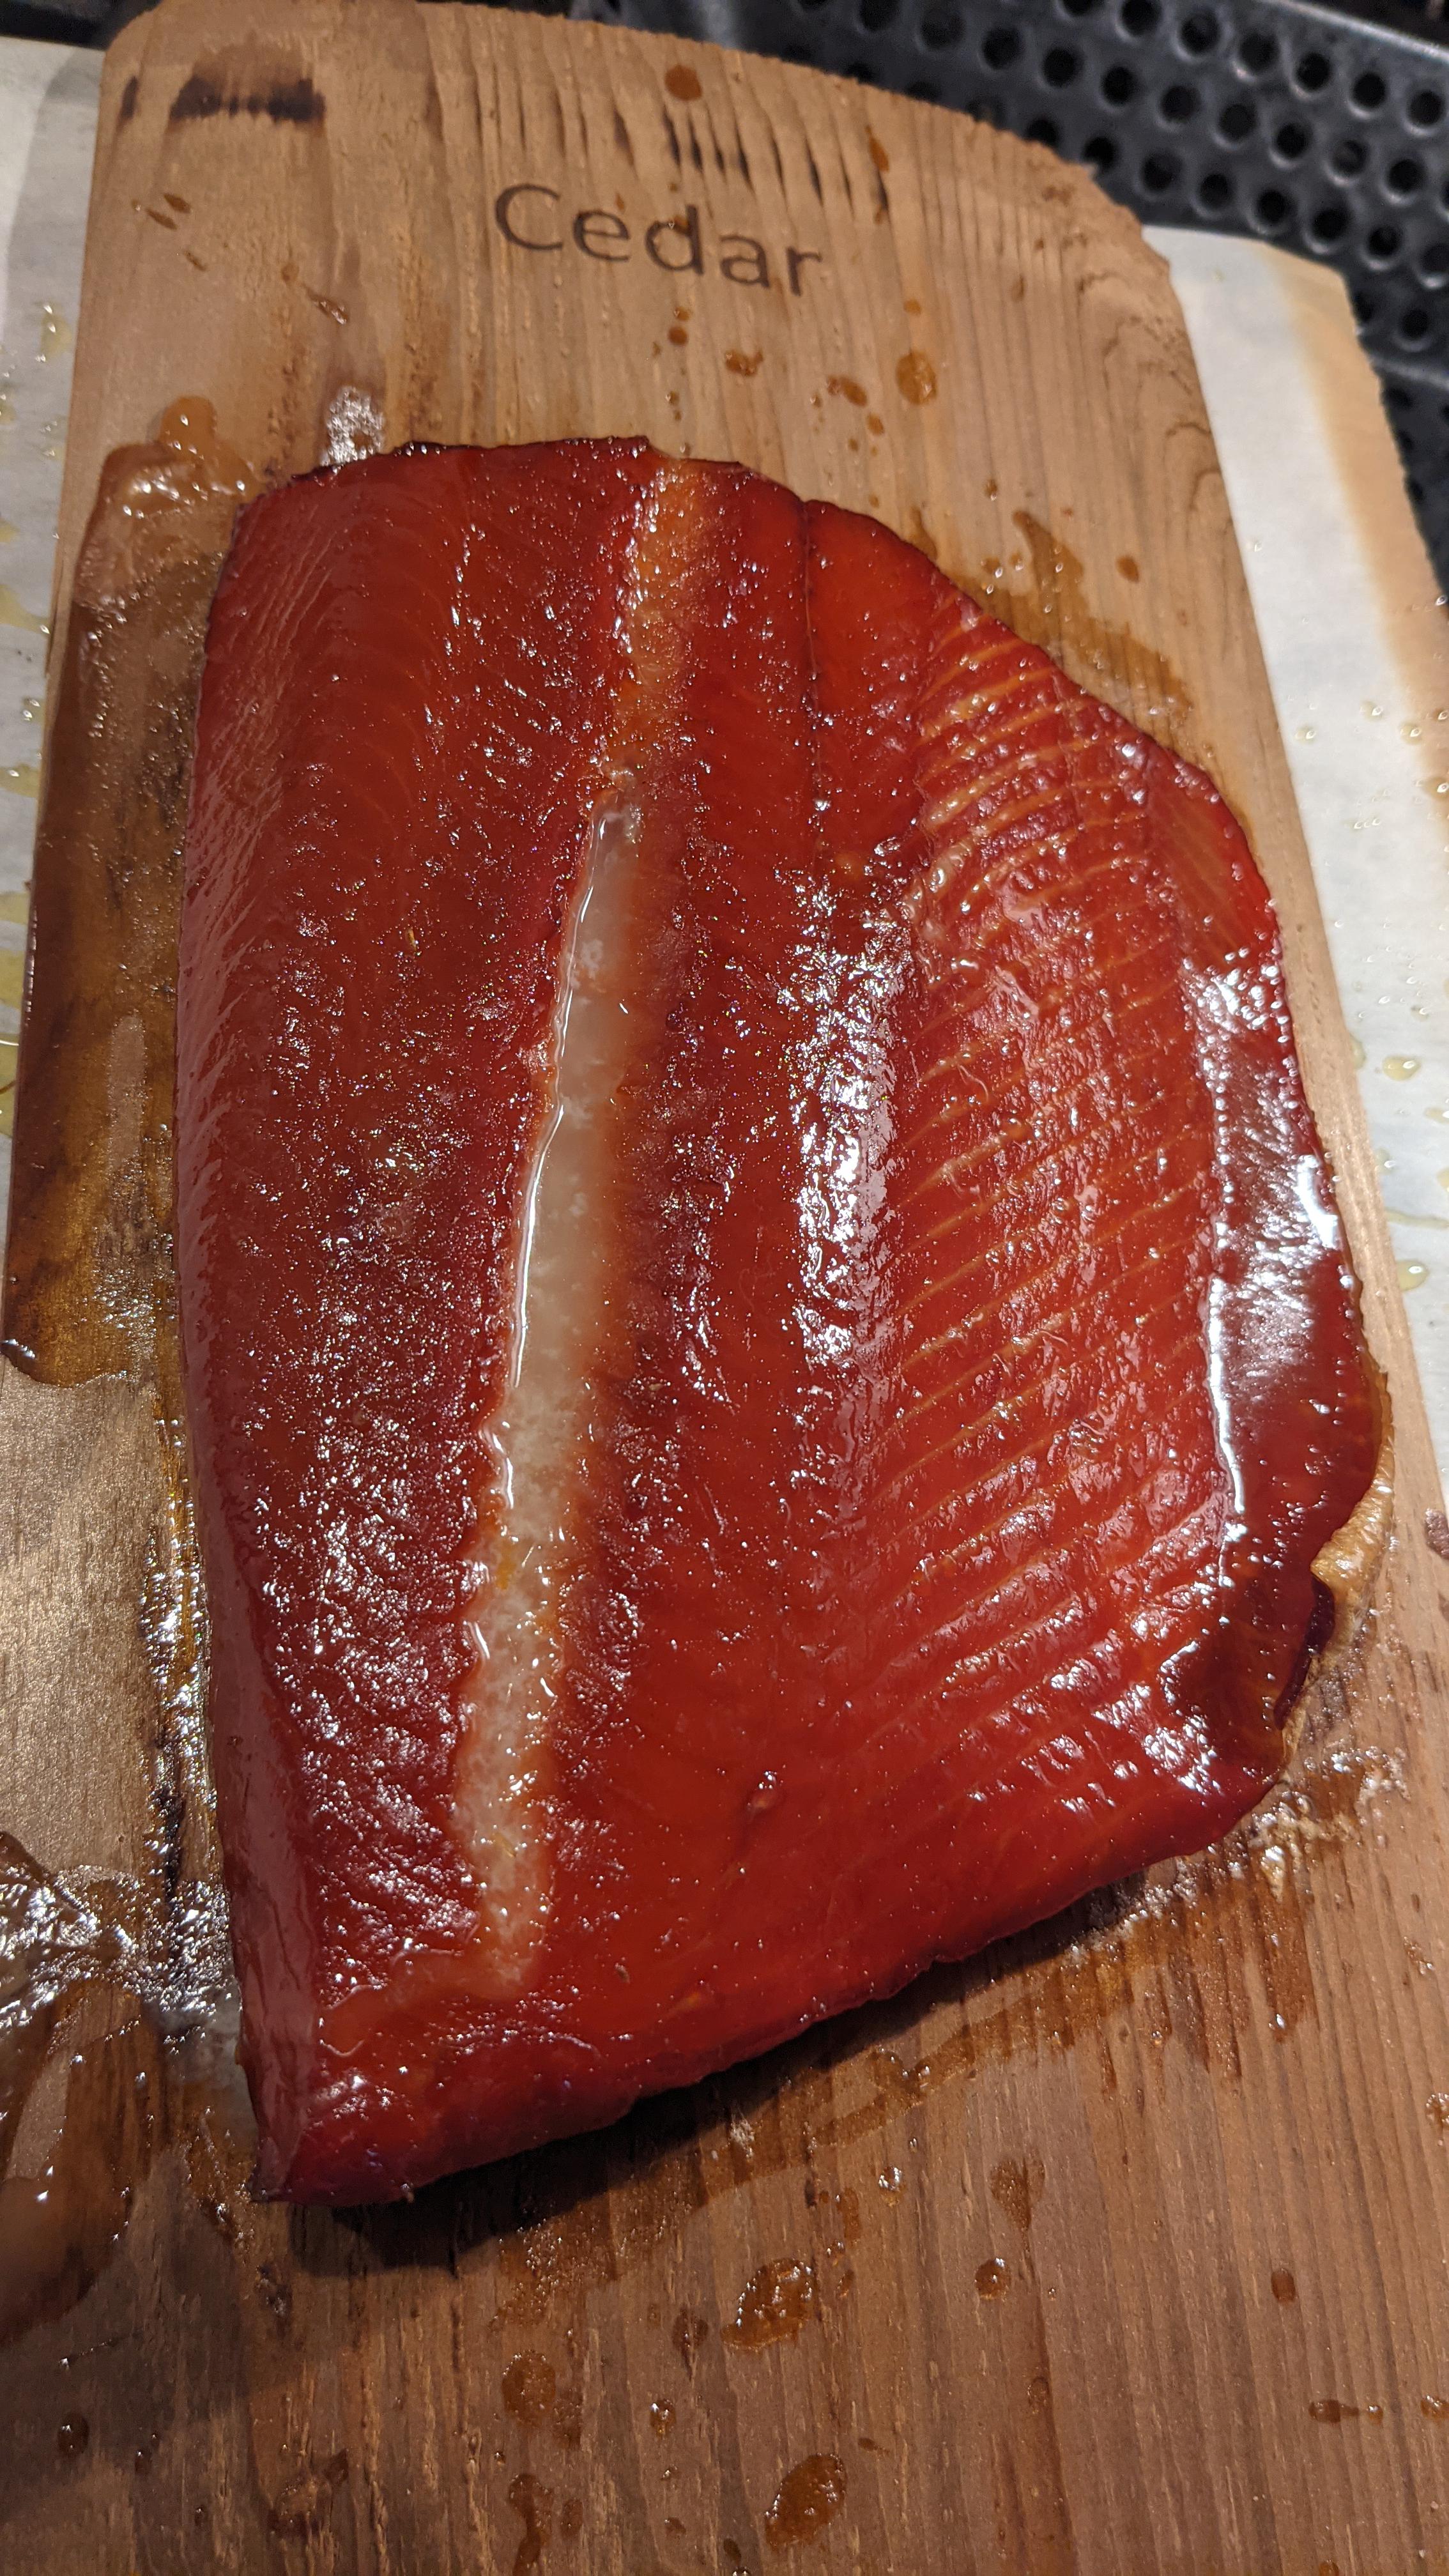 Smoke Wood for Salmon: Enhancing Flavor with the Right Wood